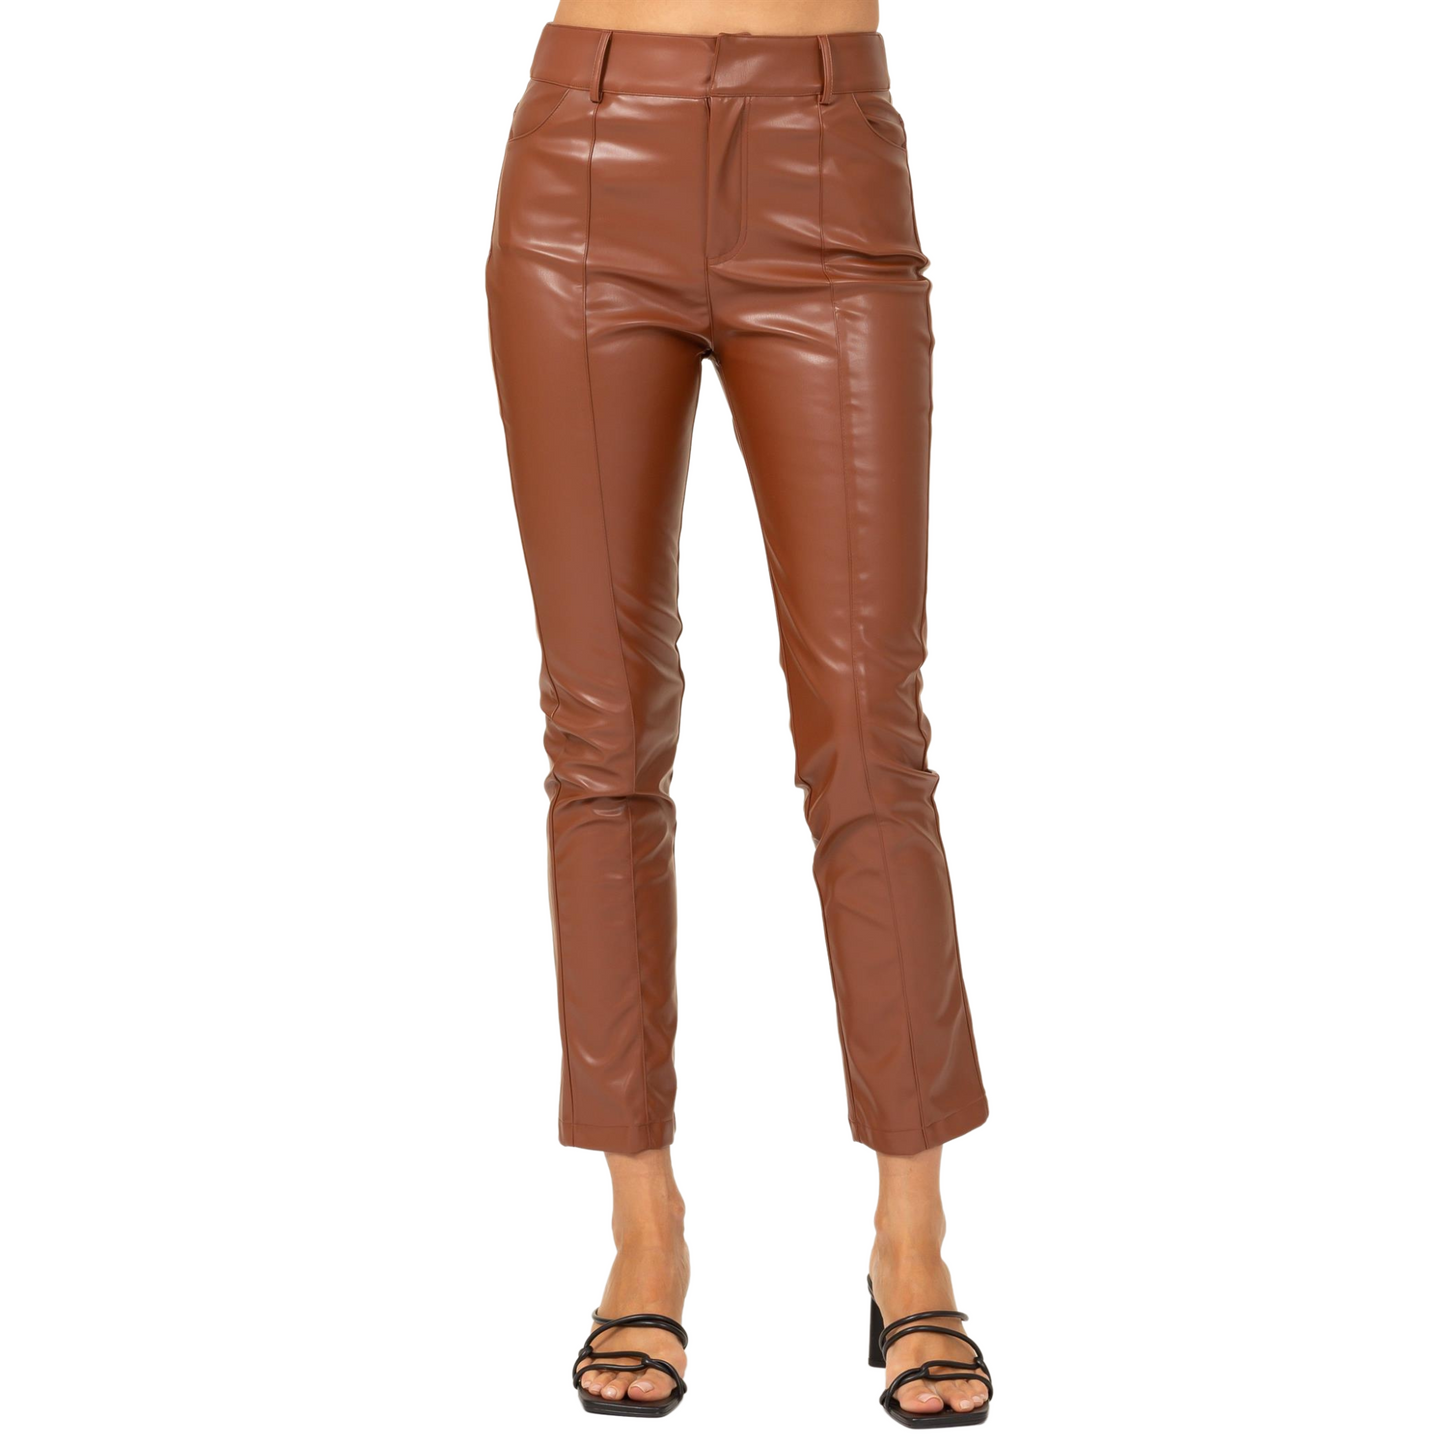 Fashion on Earth P-Leather Pants Brown or Khaki (S-L)